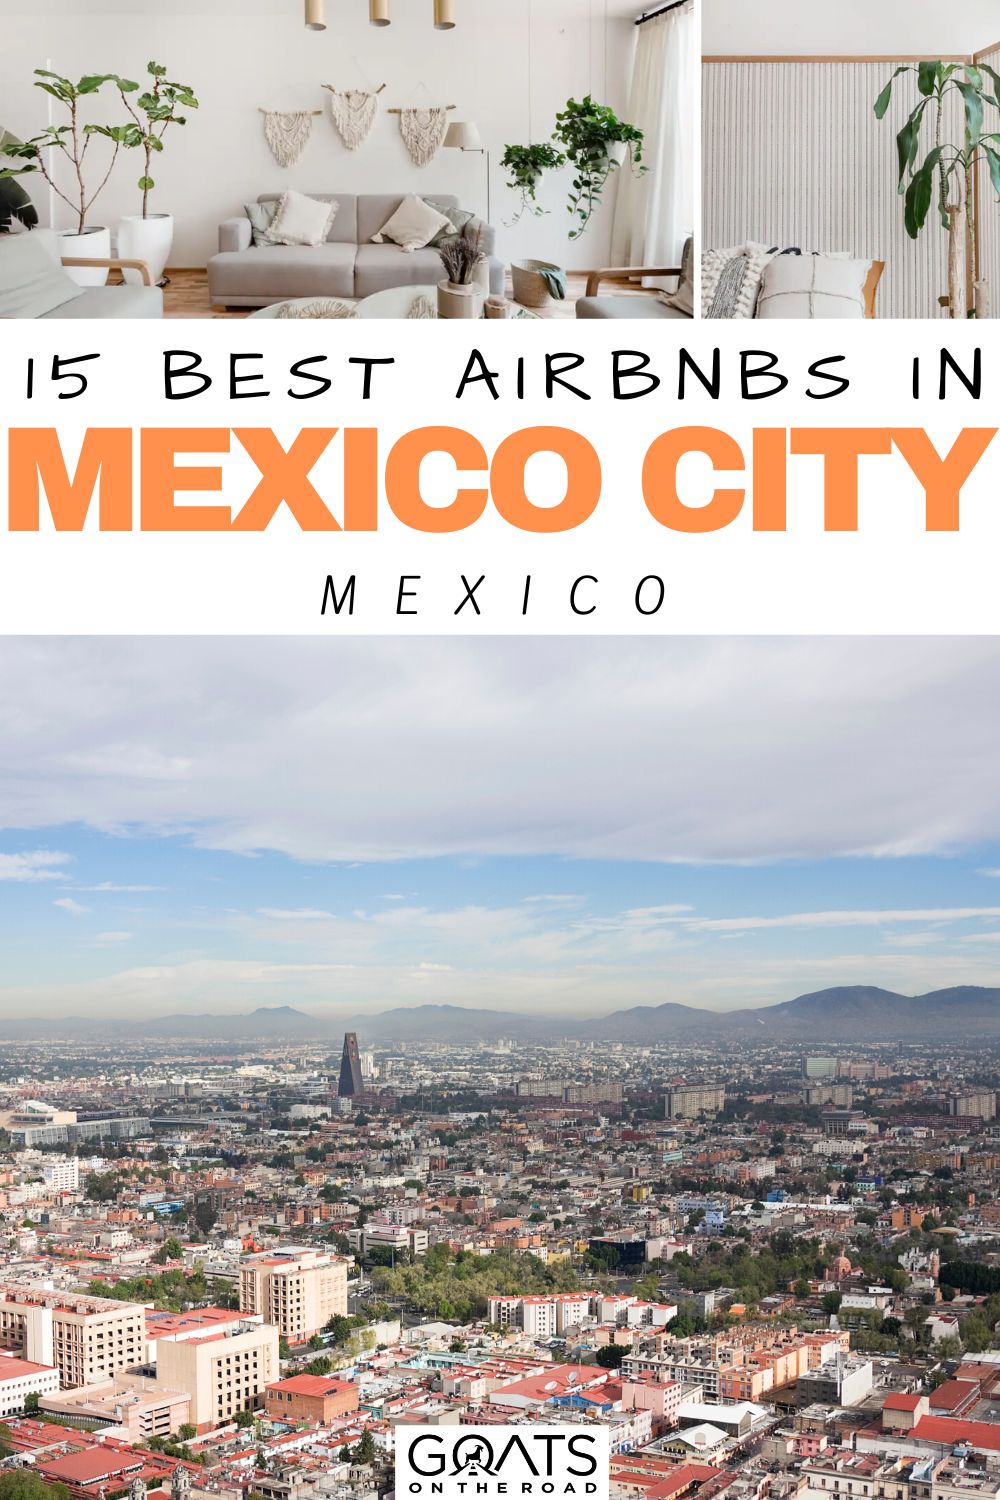 “15 Best Airbnbs in Mexico City, Mexico